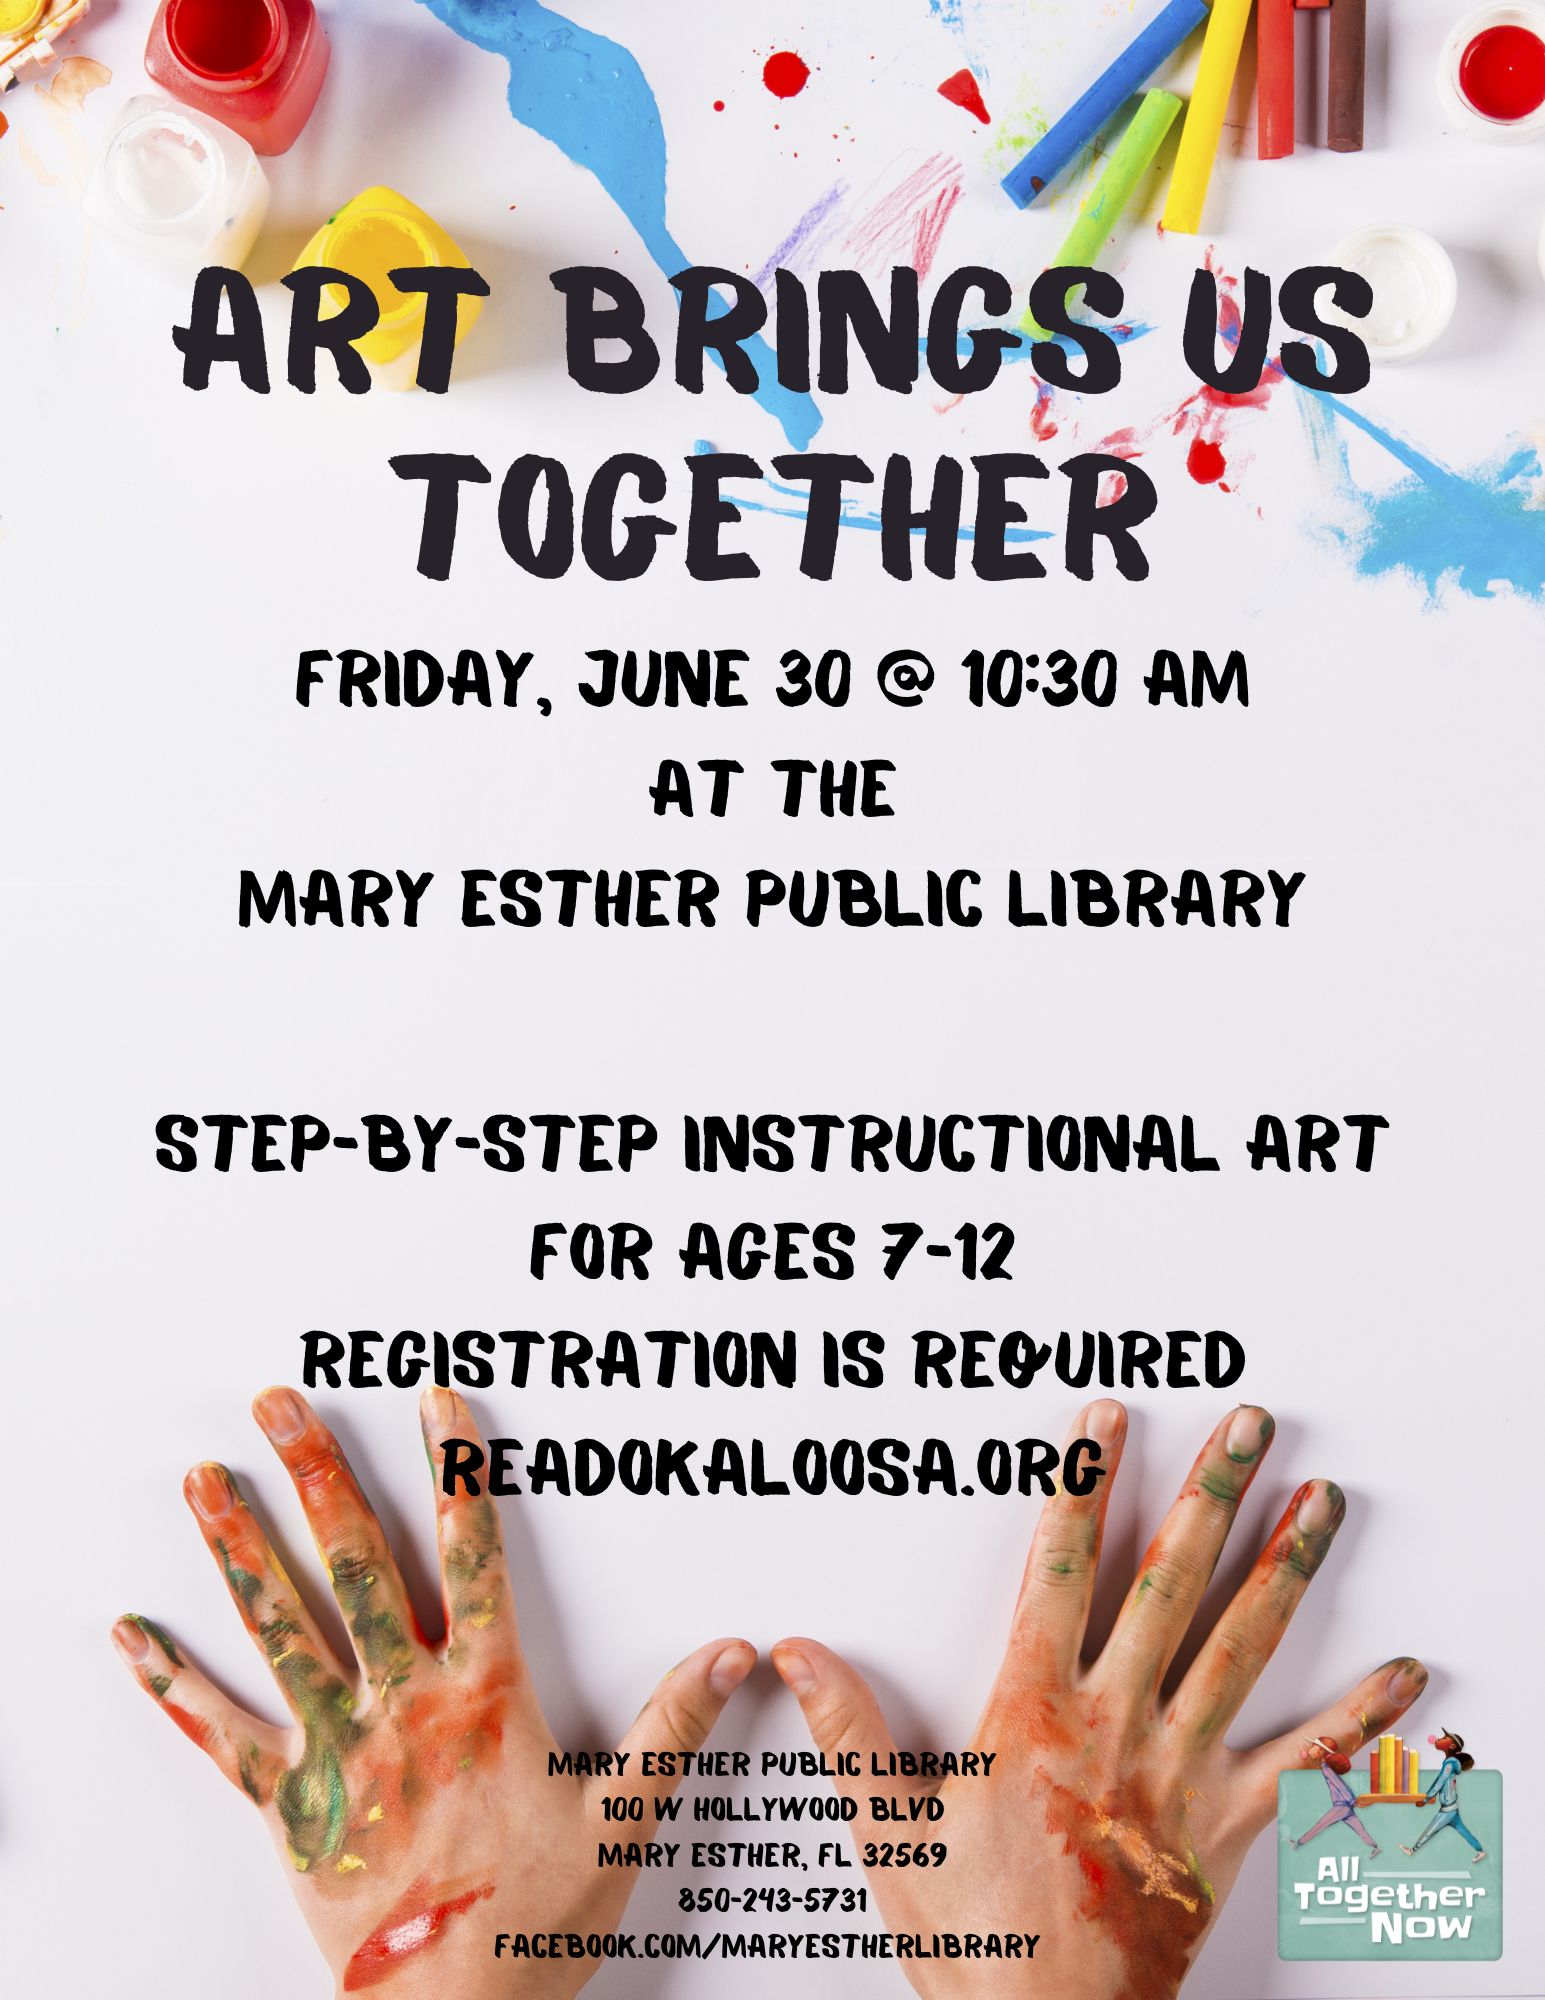 step by step instructional art for ages 7-12 friday june 30 at 10:30 am